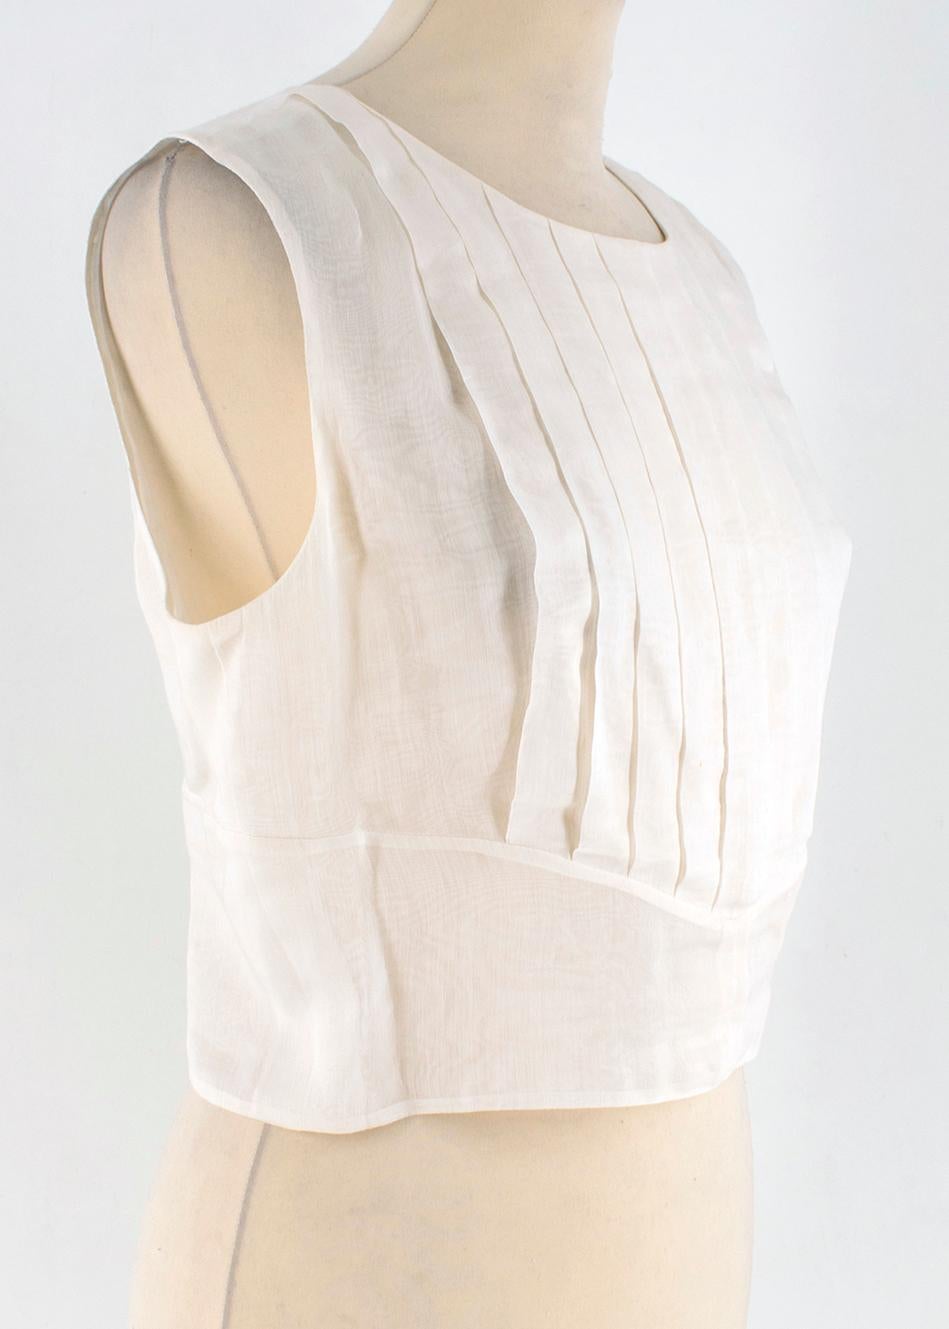 Chanel Cropped White Pleated Silk Top

-Silk Blend, white colour
-Sleeveless 
-Cropped cut
-Pleated front 
-Open-back 
-Hook and fasten closure on back
-Stripped white buttons with signature 